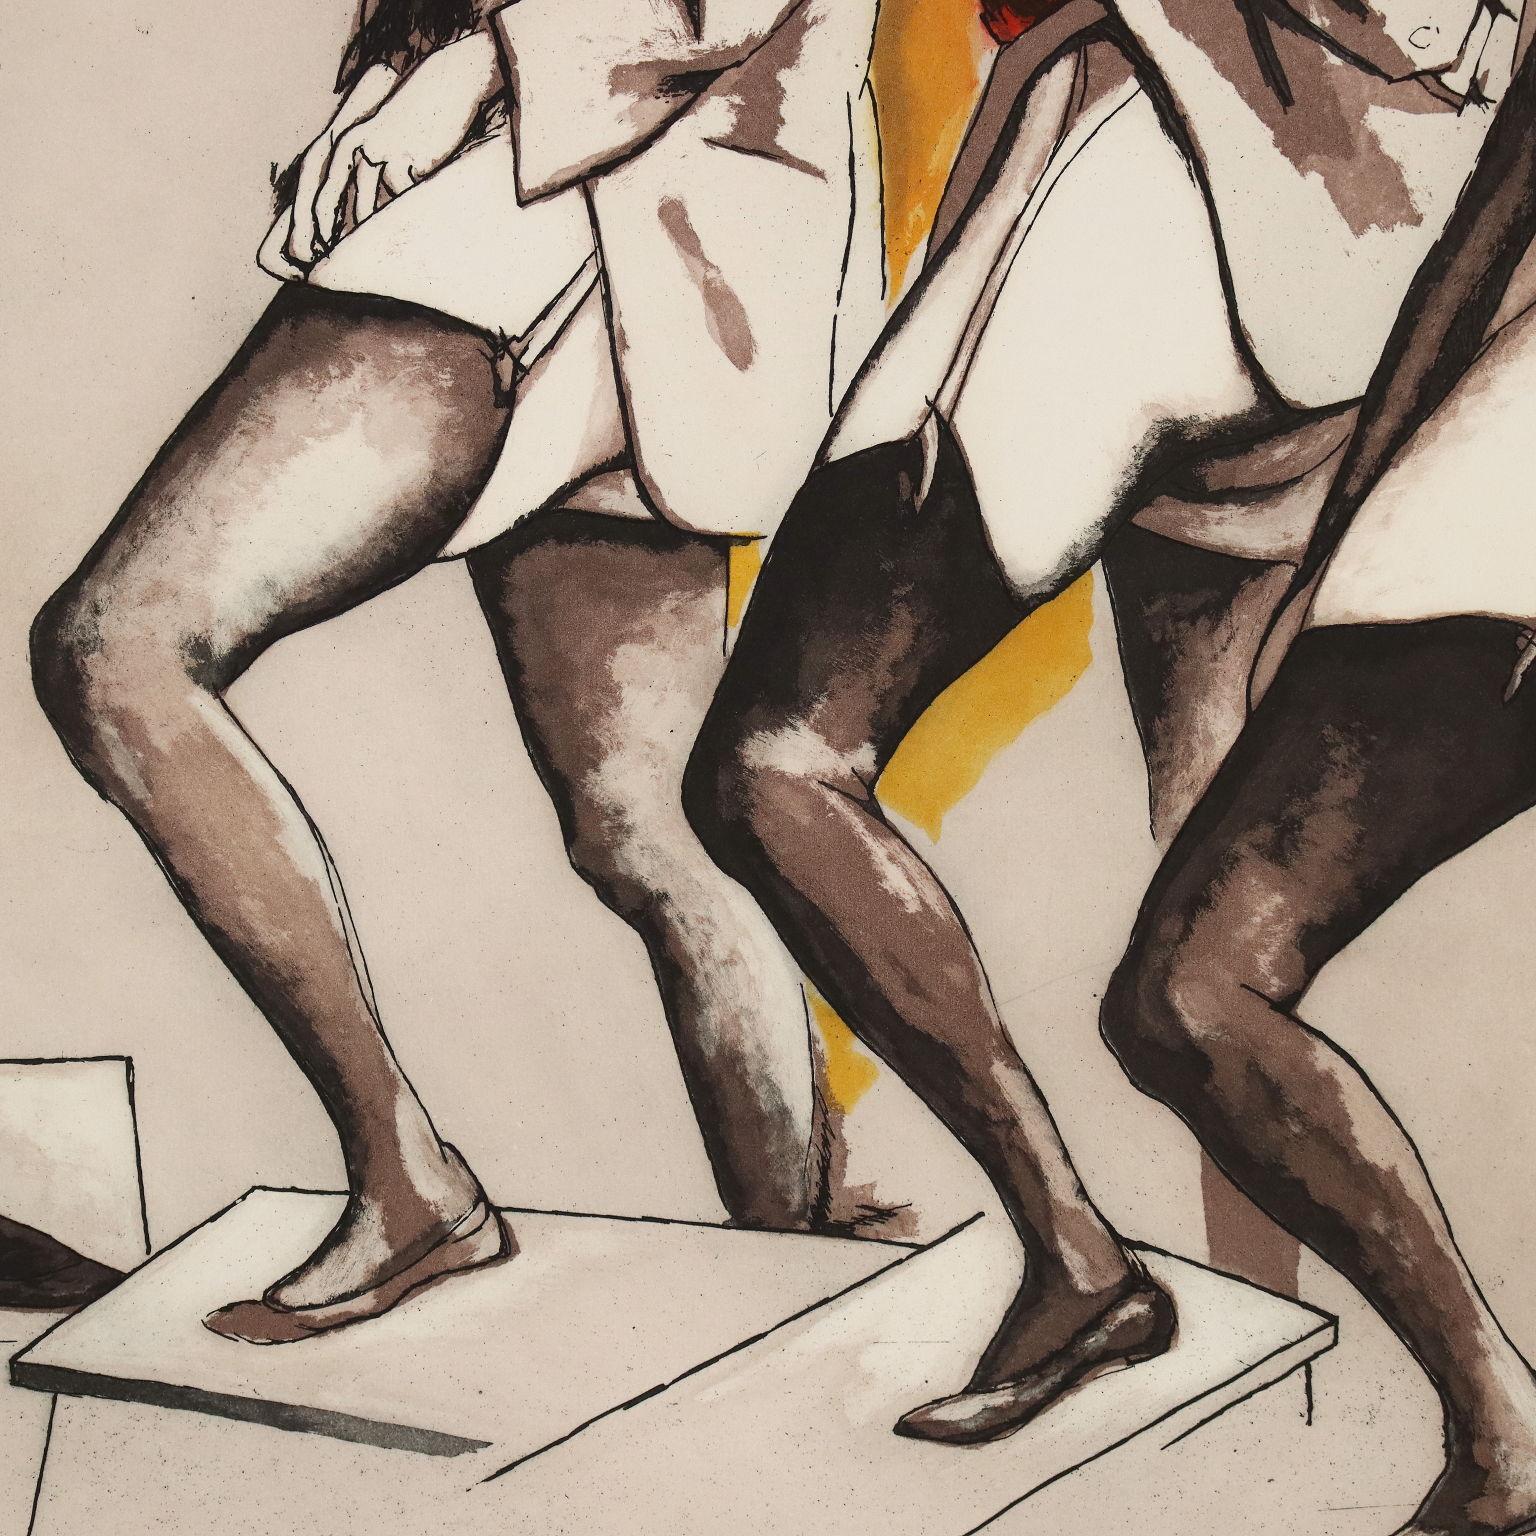 R. Guttuso Etching on Paper Italy 1986, Four women 2